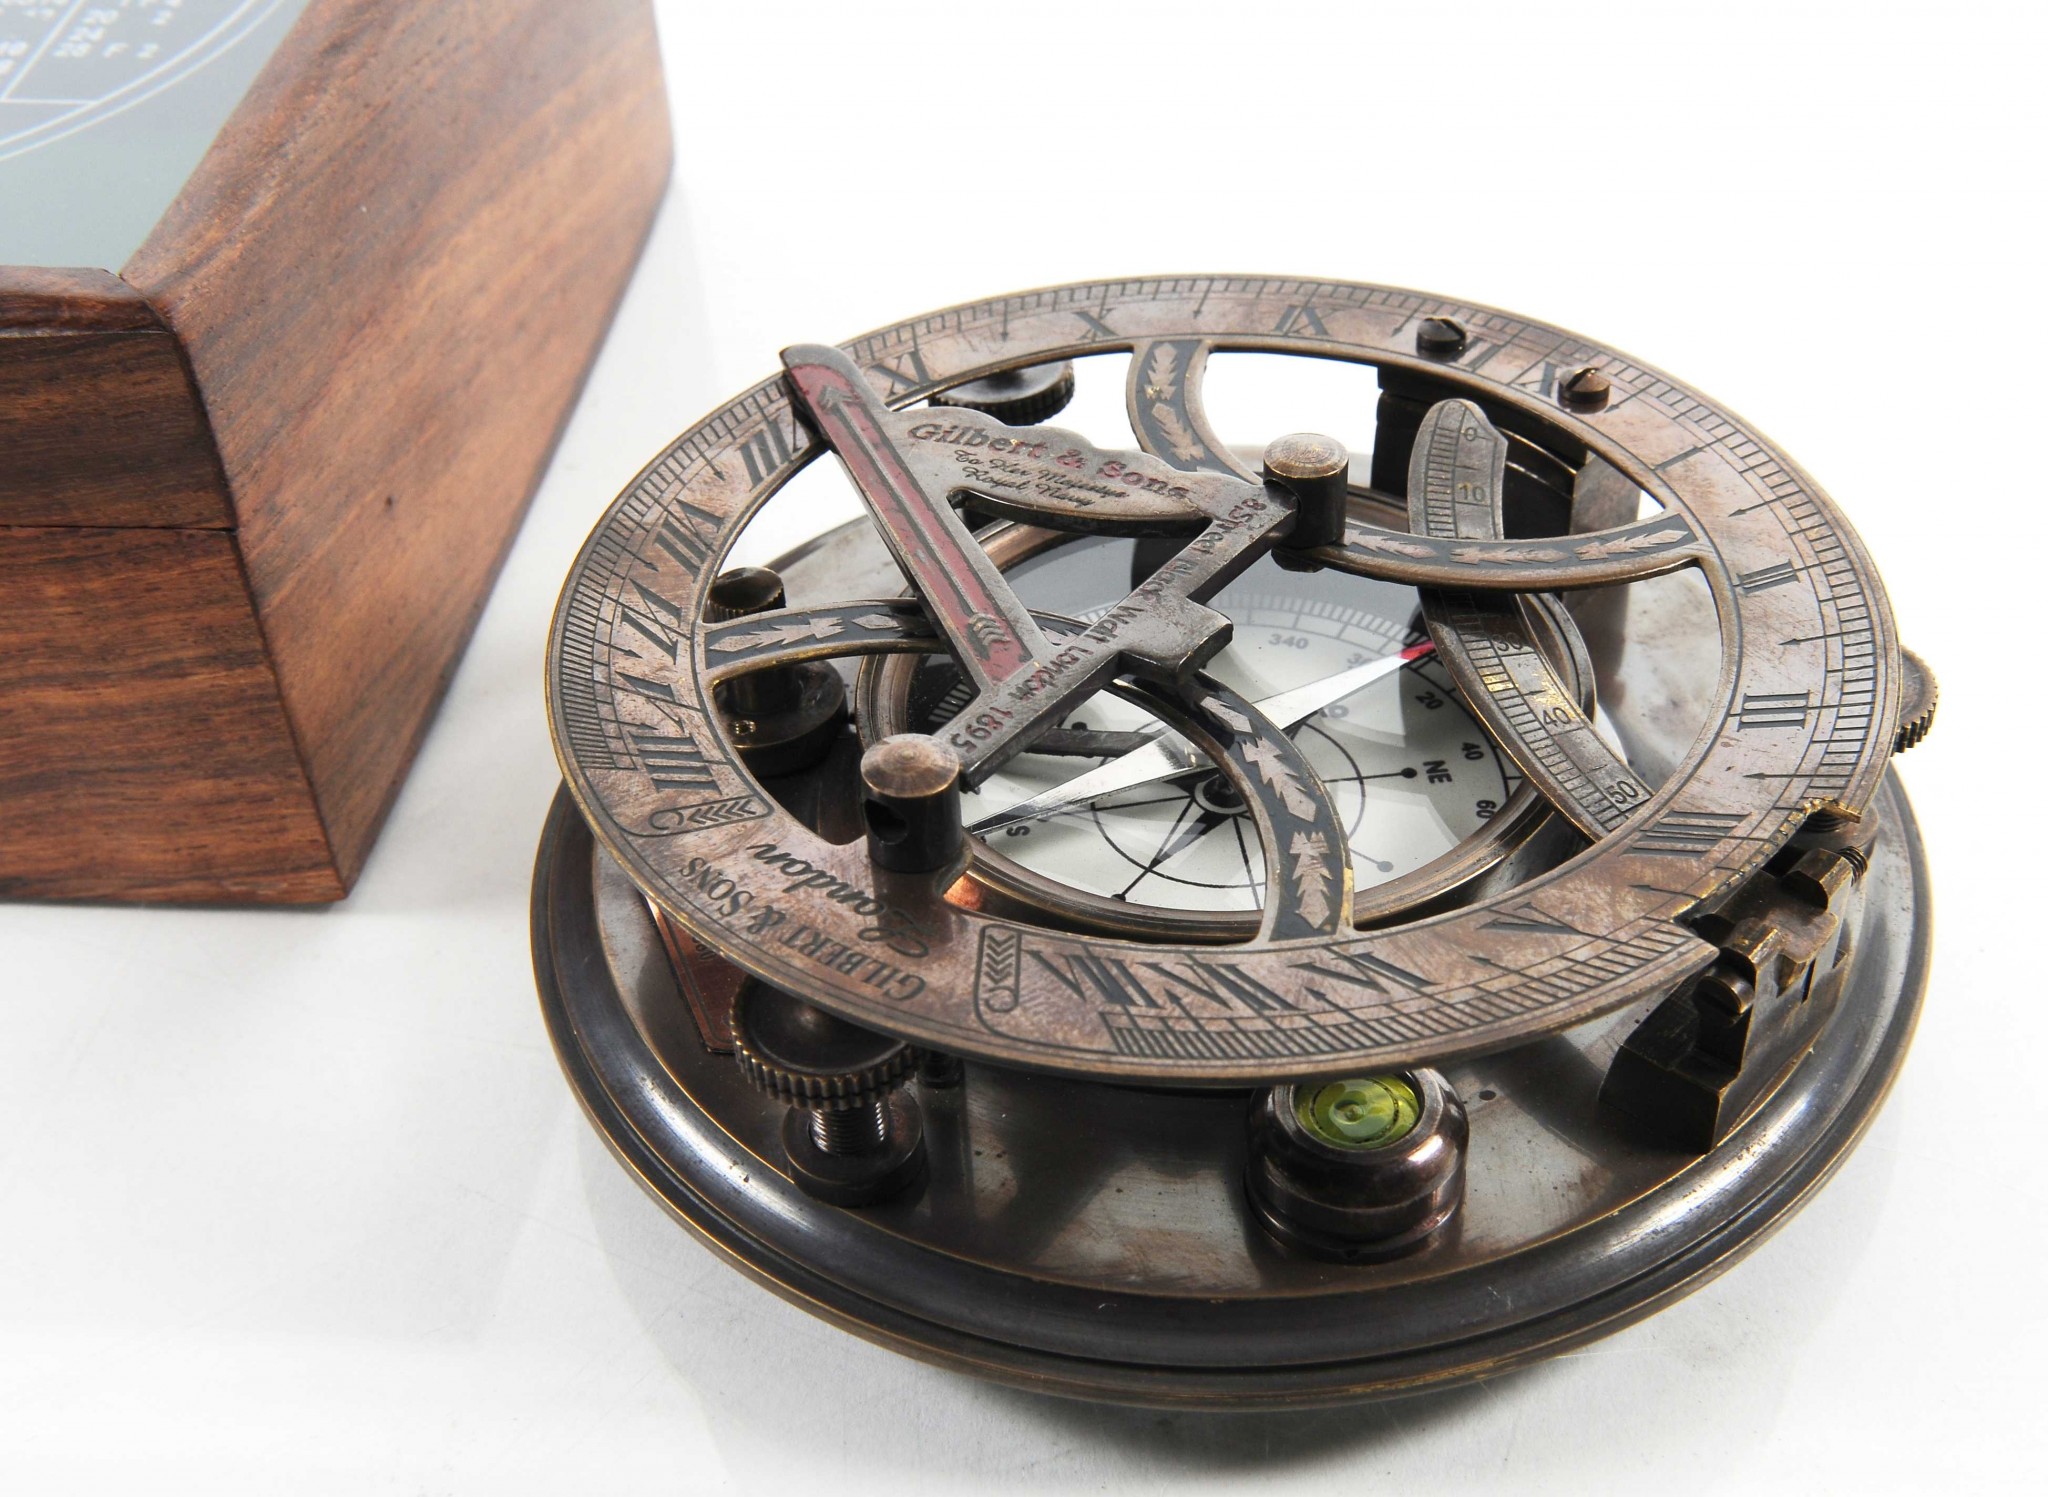 5" x 5" x 4" Sundial Compass in Wood Box - Large